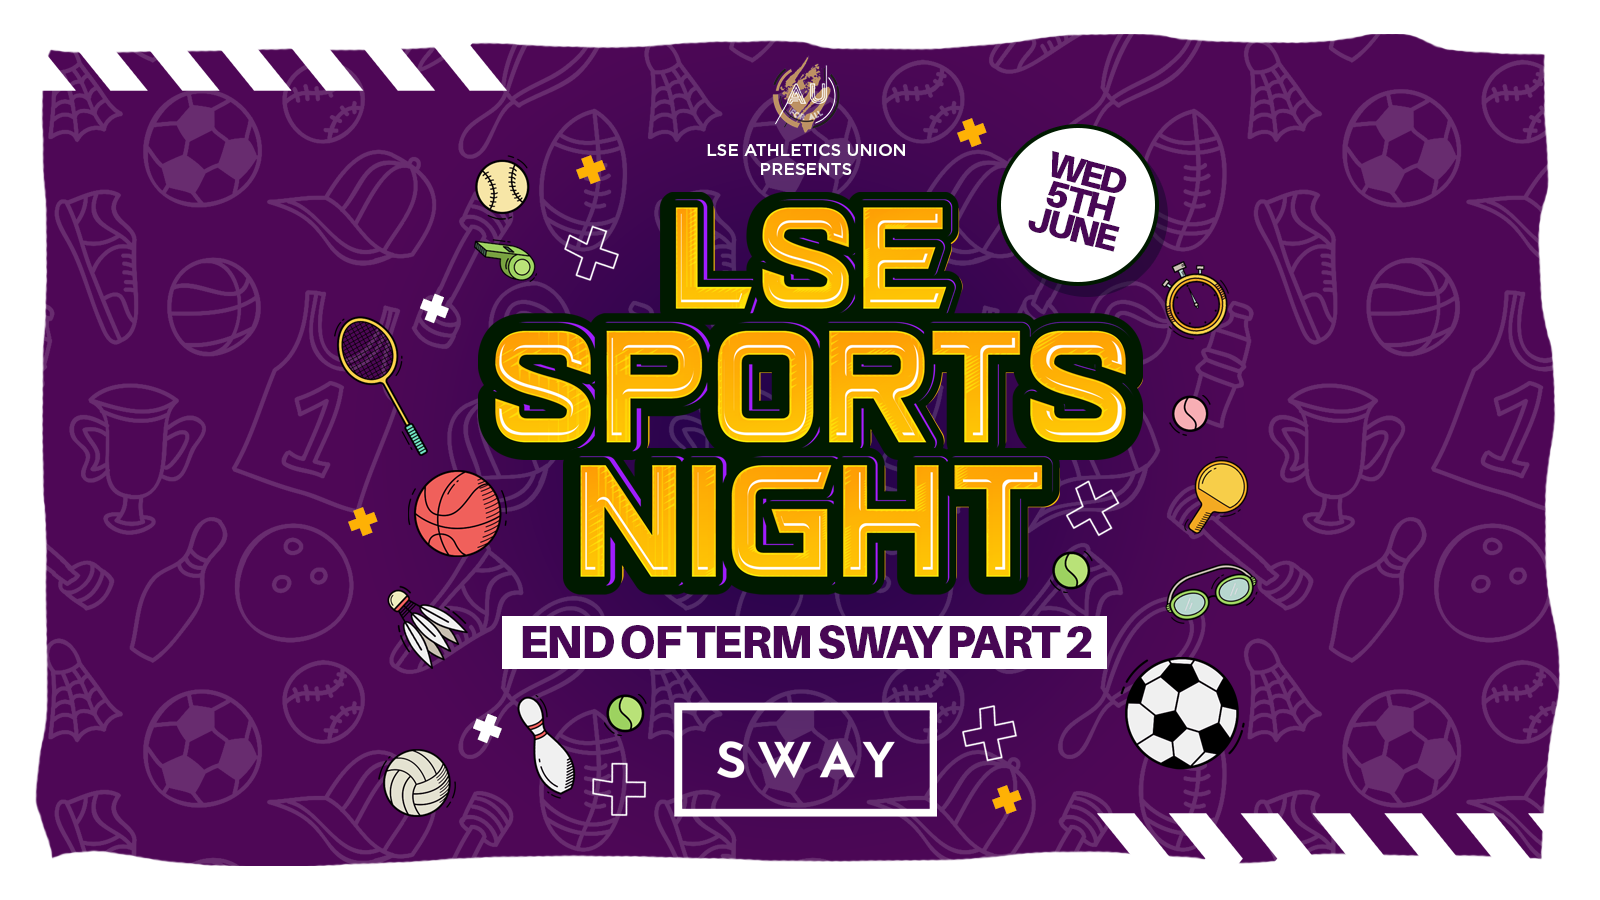 LSE AU Presents 💃 The Official LSE Sports Night – END OF TERM (Part 2) SWAY London  ❤️